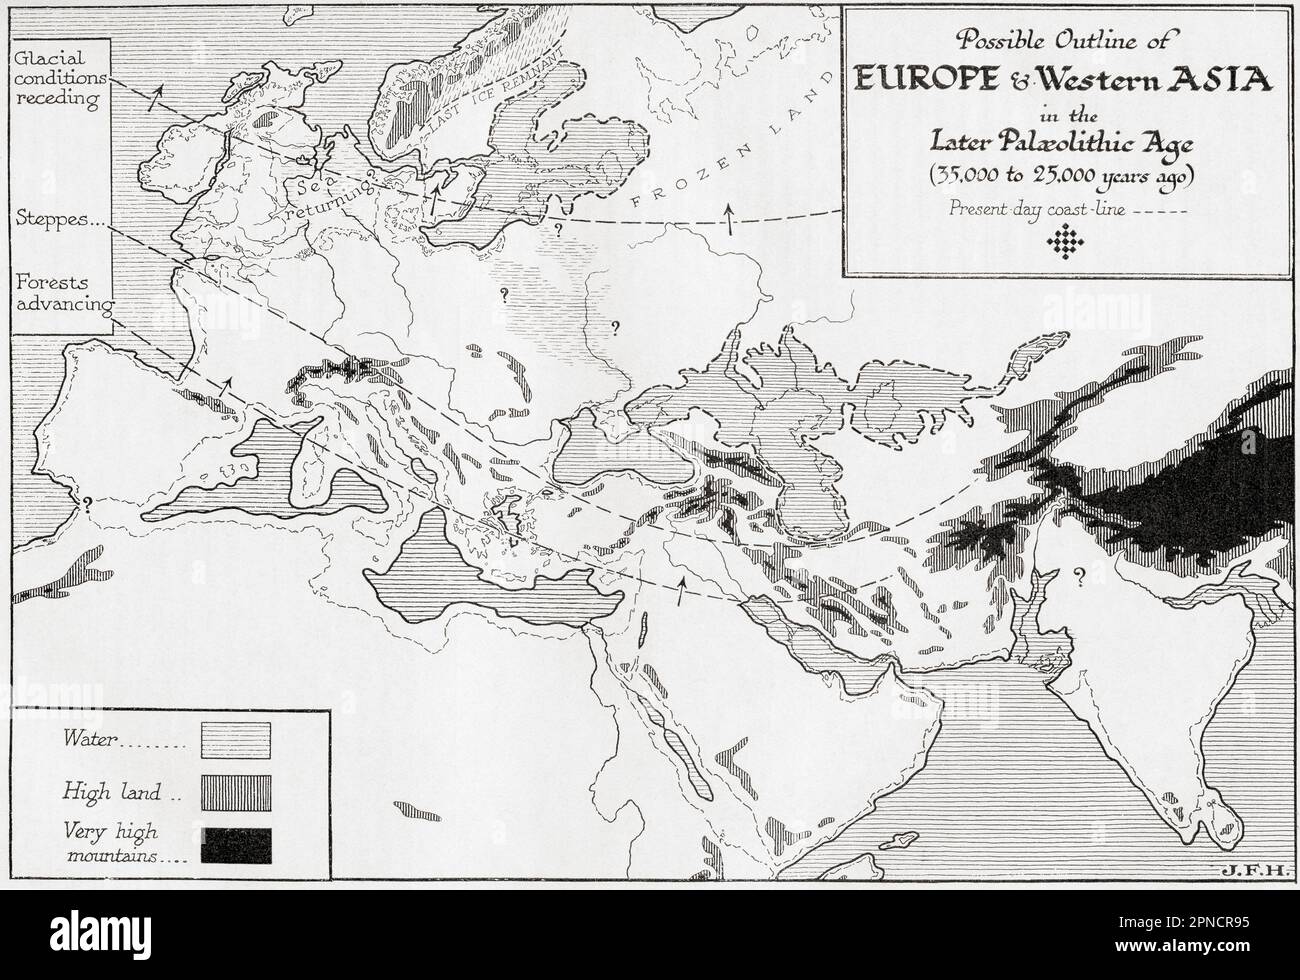 Map showing the possible outline of Europe and Western Asia in the Later Palaeolithic Age, showing the glacial conditions receding, the Steppes and the advance of forests.  From the book Outline of History by H.G. Wells, published 1920. Stock Photo